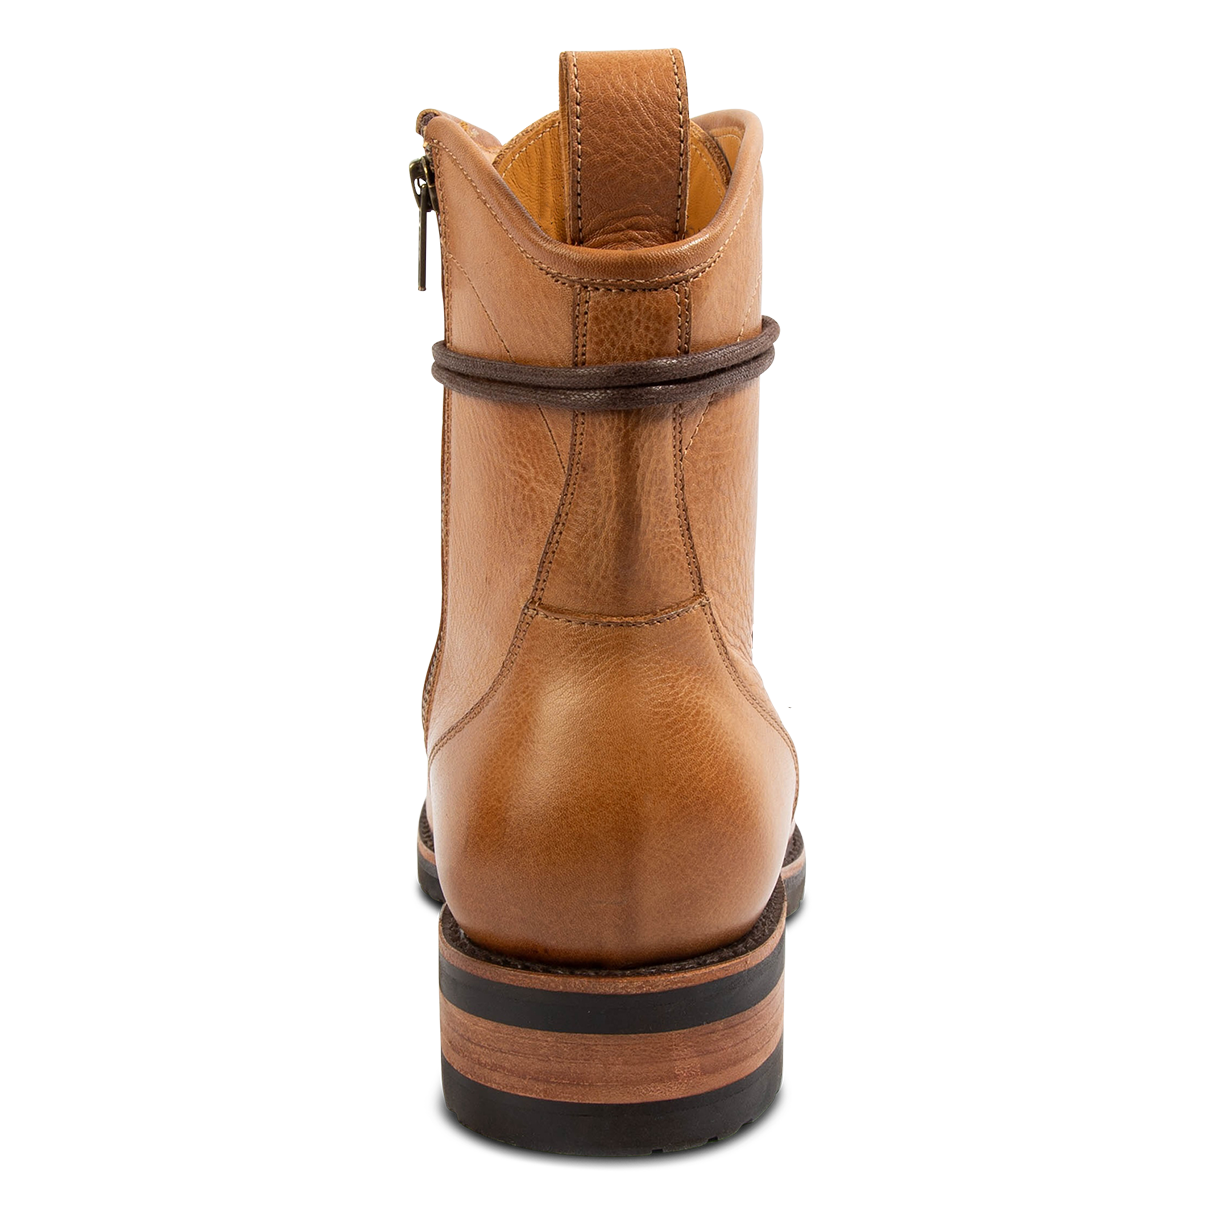 Back view showing a leather pull strap and elevated heel on FREEBIRD men's Idaho whiskey leather boot